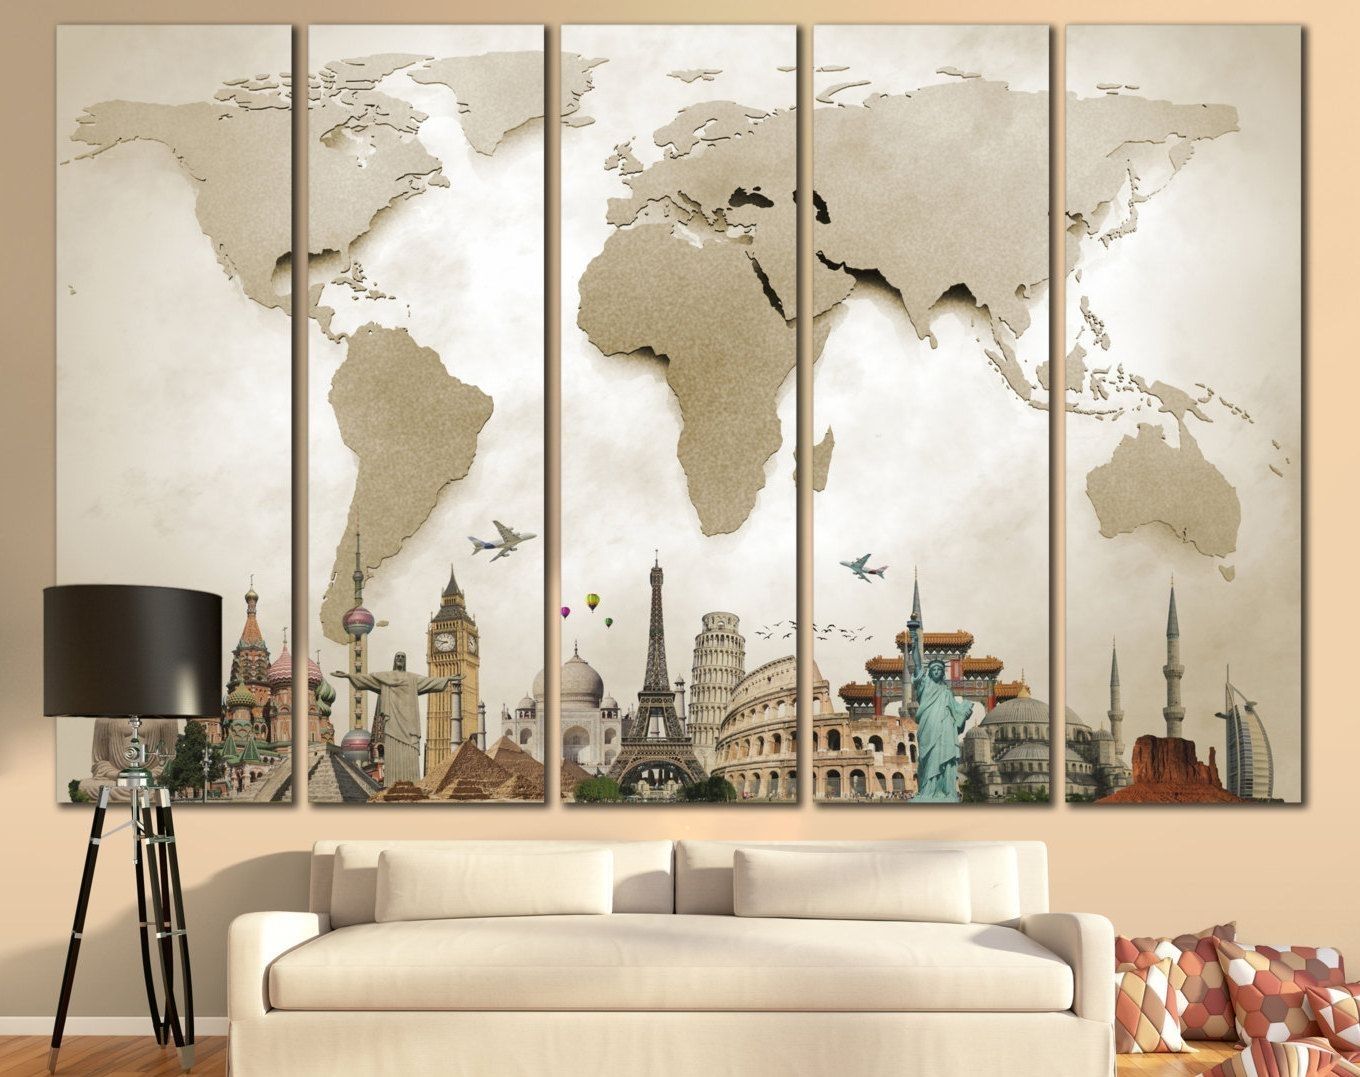 Unique Extra Large Wall Art Related Items | Etsy | Wall Arts In Most Recently Released Wall Art Map Of World (View 13 of 20)